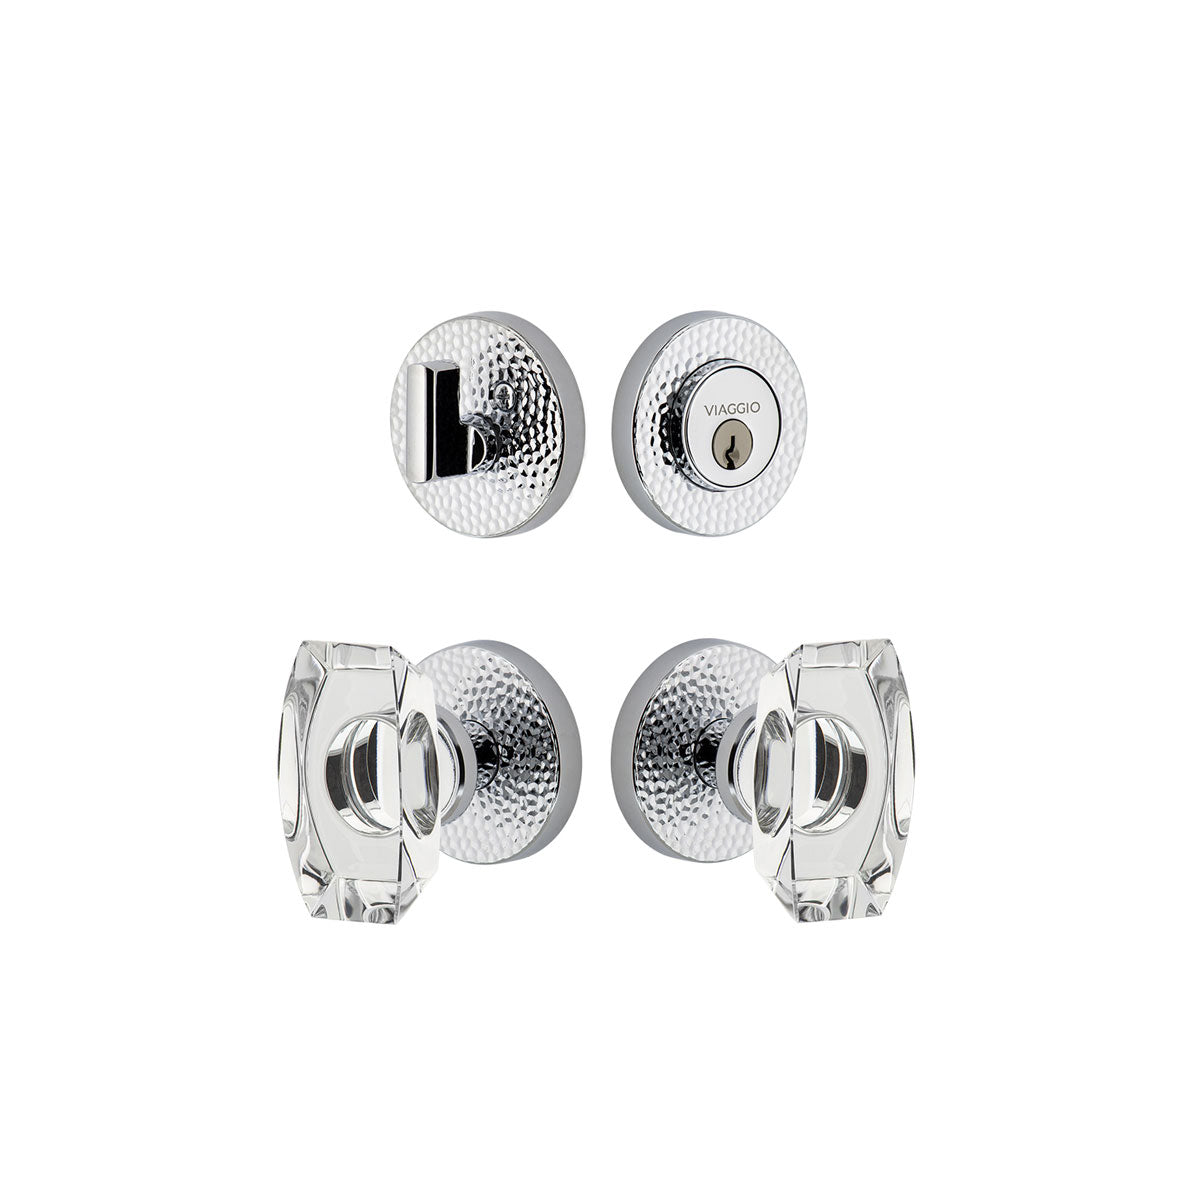 Circolo Hammered Rosette Entry Set with Stella Knob in Bright Chrome